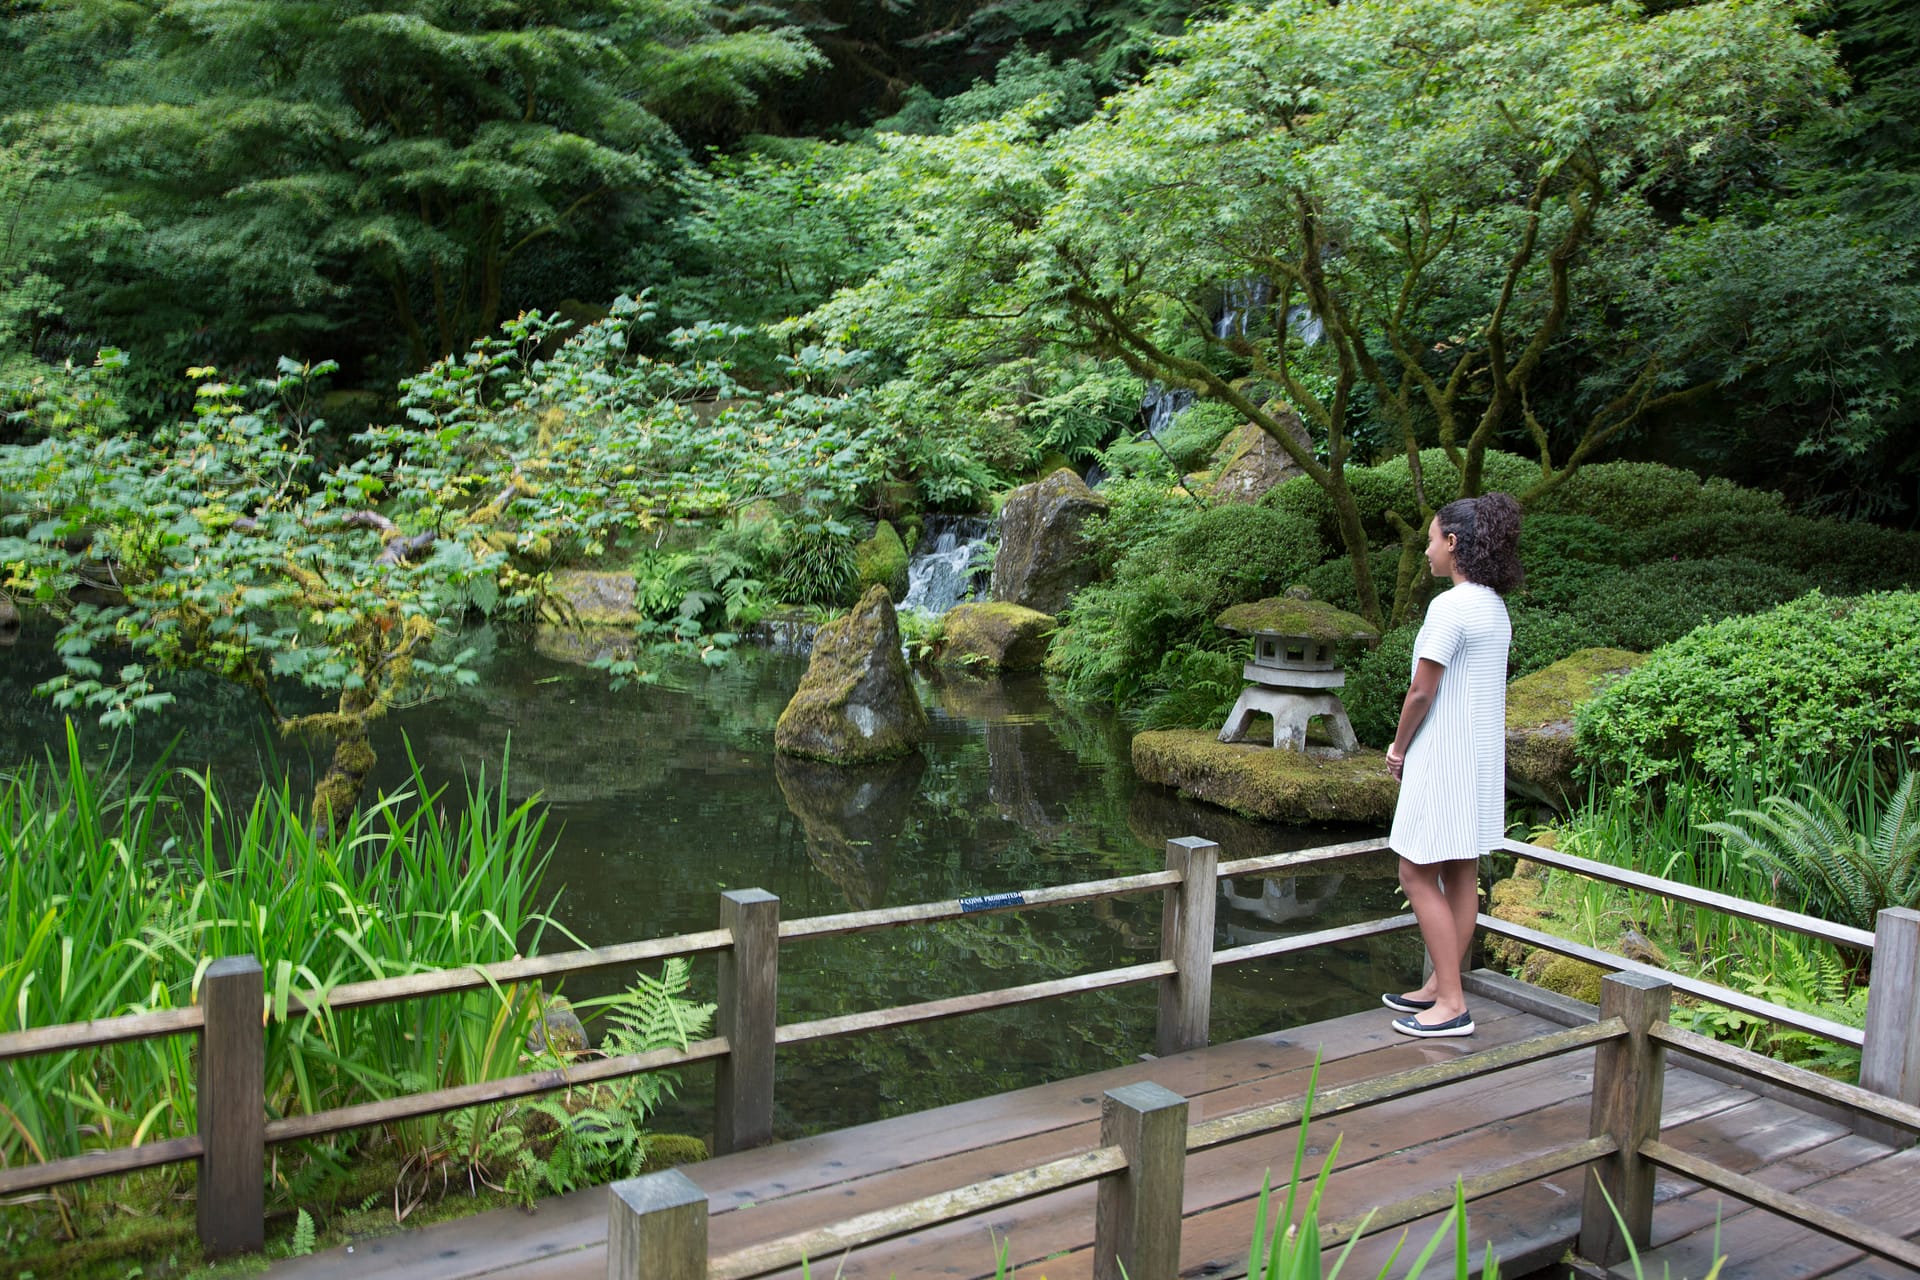 A young woman looks out at a pond and stone lantern while standing on a wooden bridge.